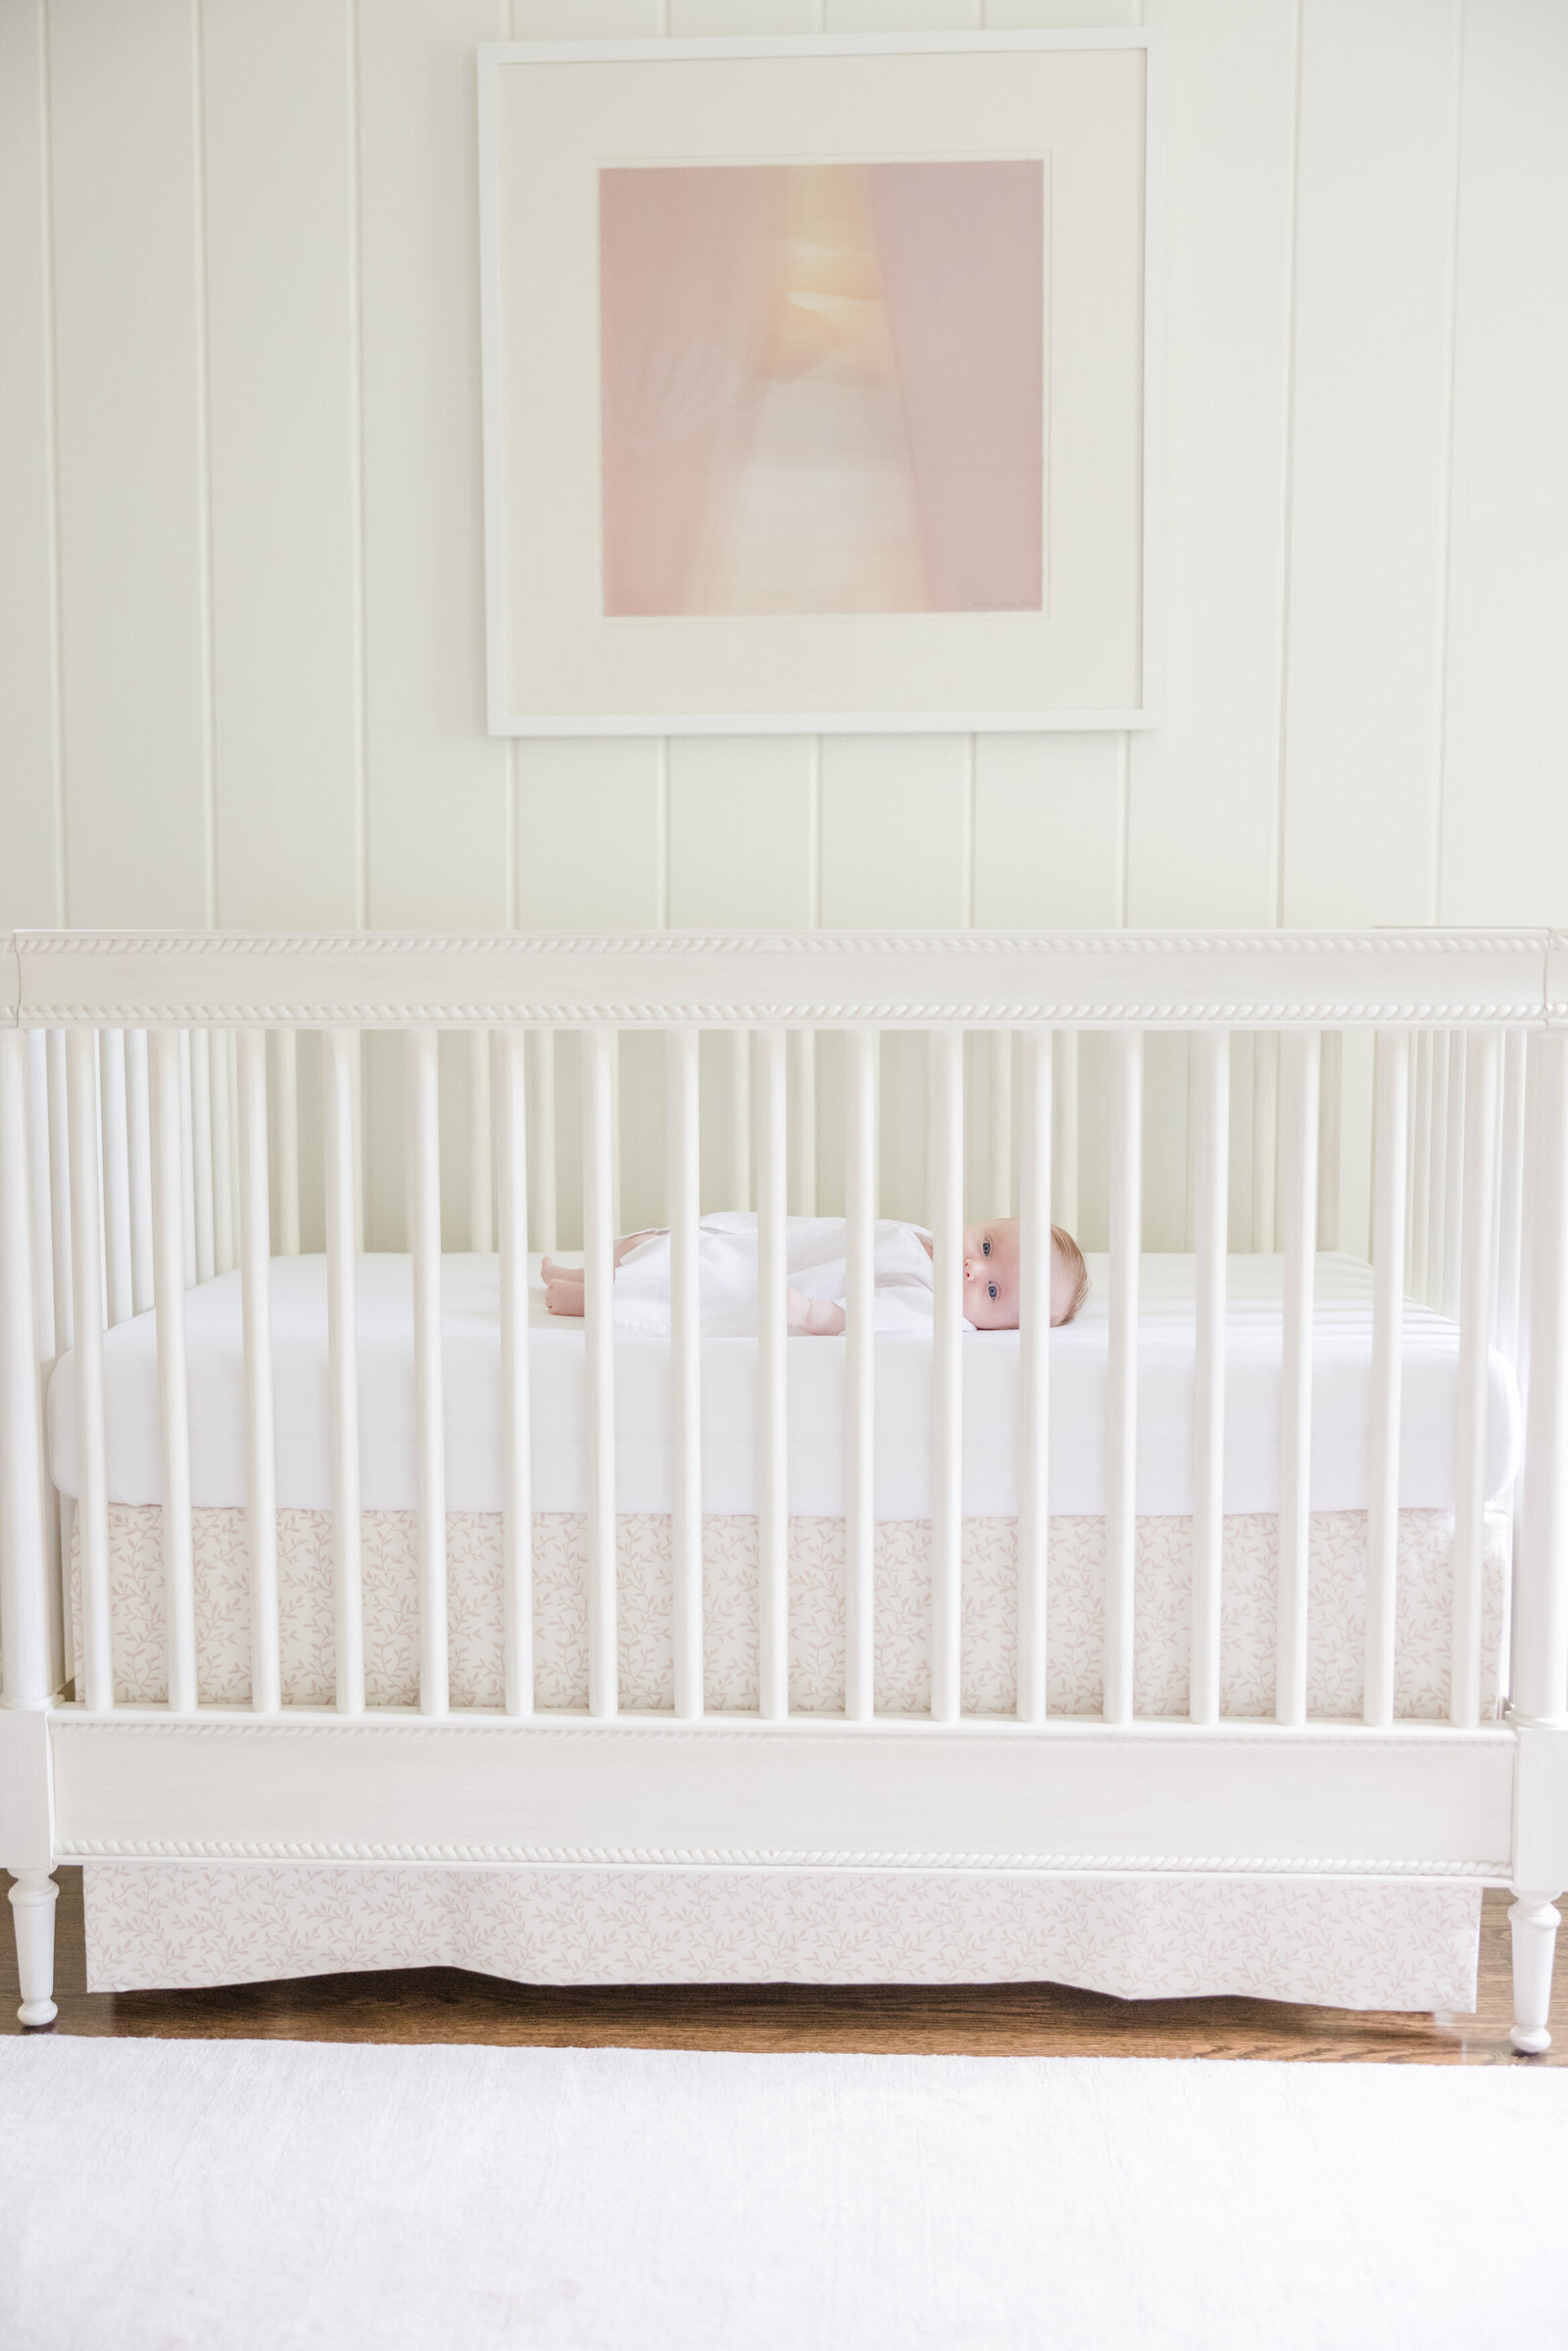 Baby girl laying in a white crib with a pink painting hanging above.